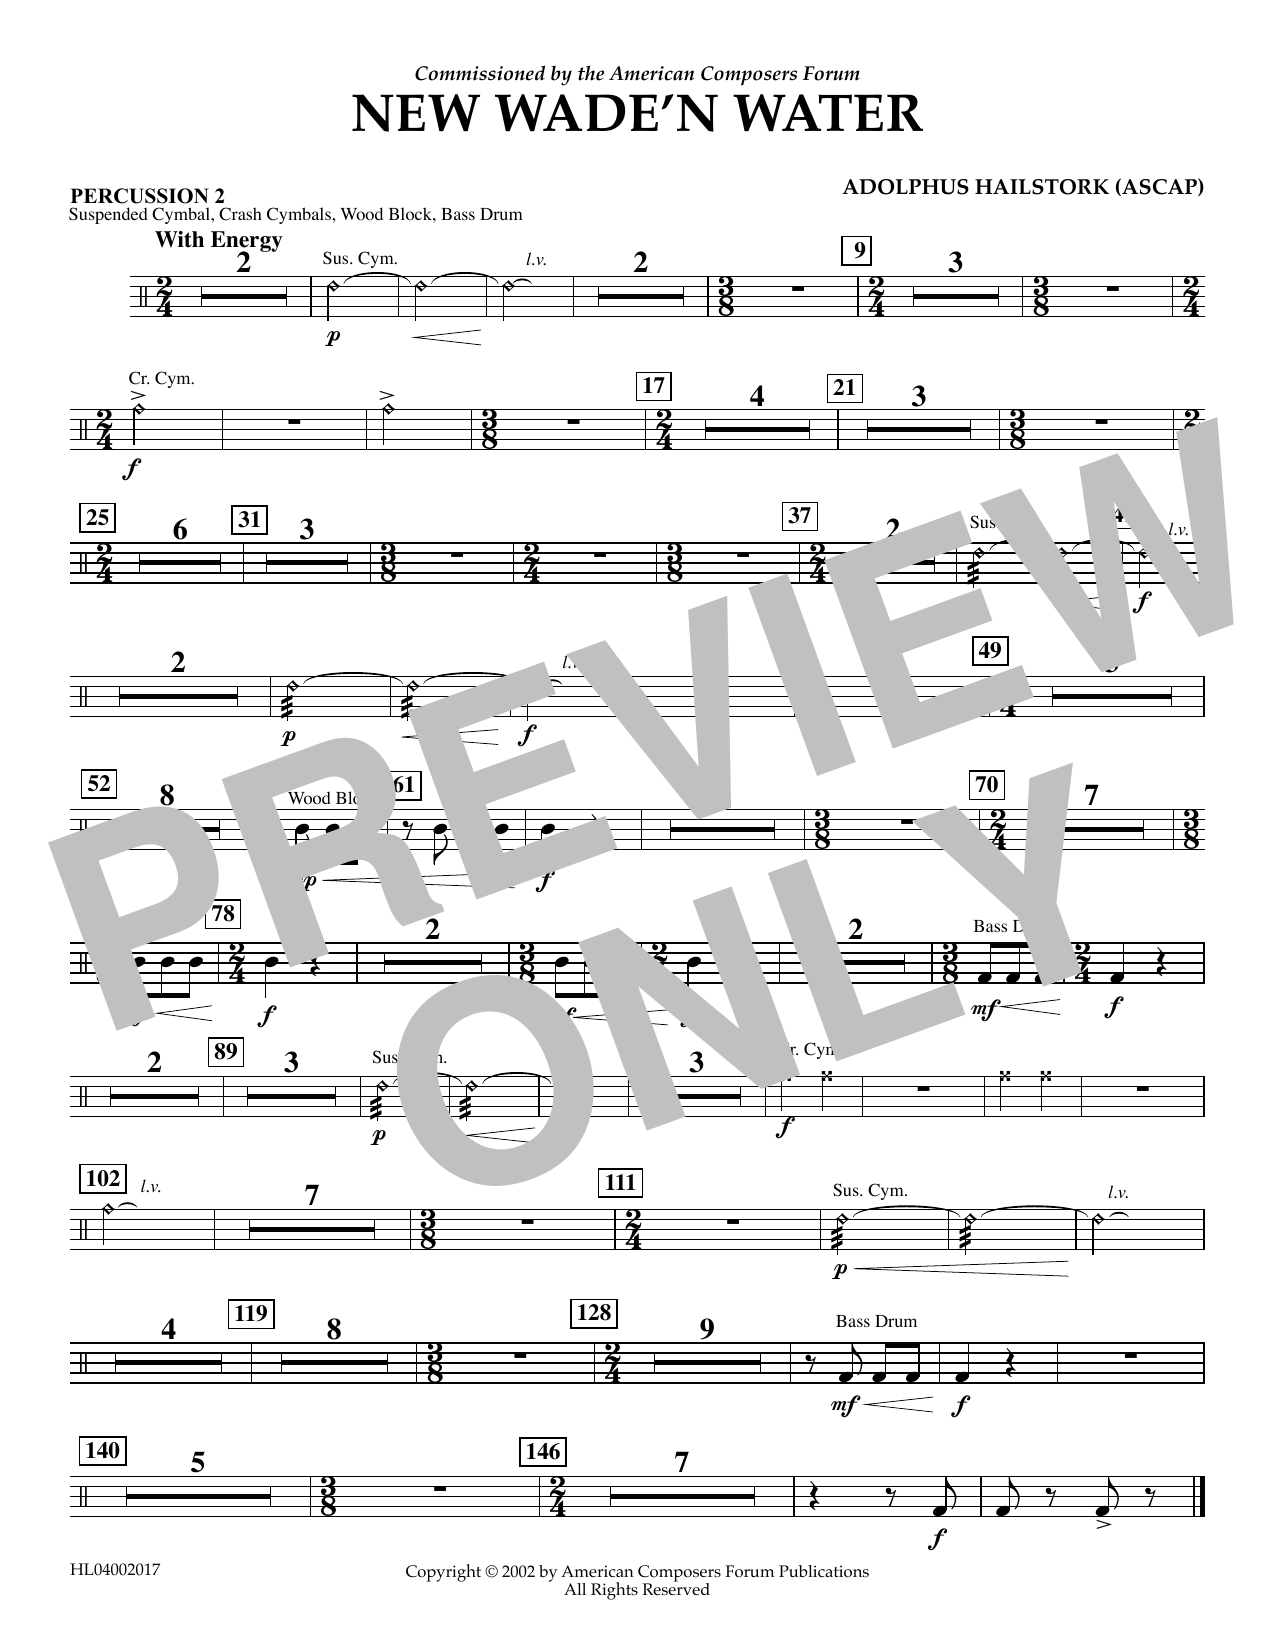 Download Adolphus Hailstork New Wade 'n Water - Percussion 2 Sheet Music